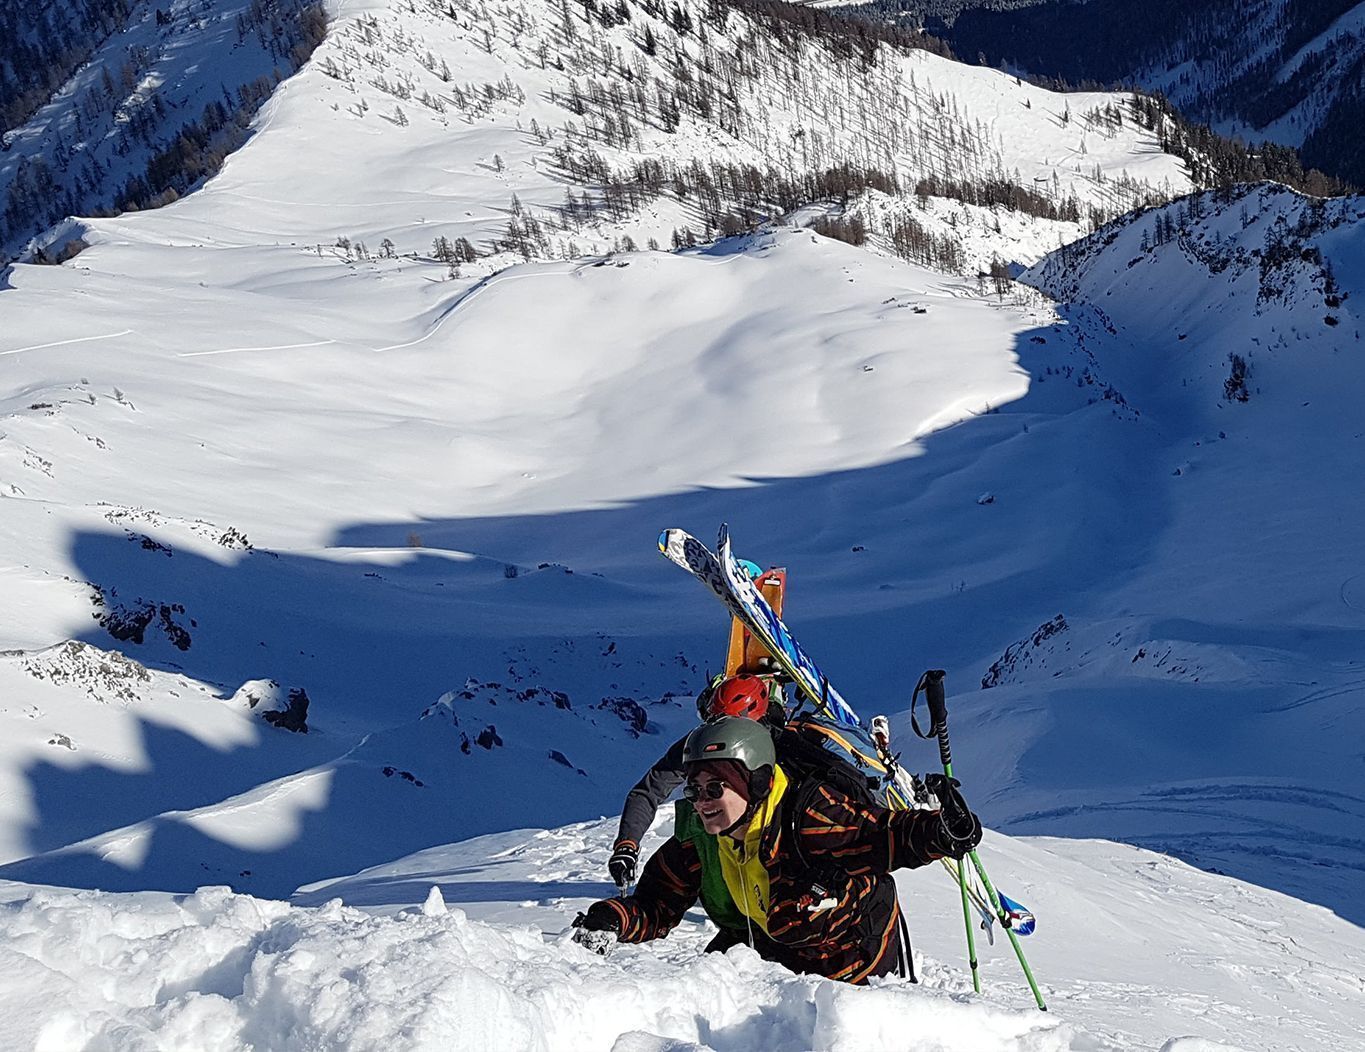 Choosing the right ski touring backpack